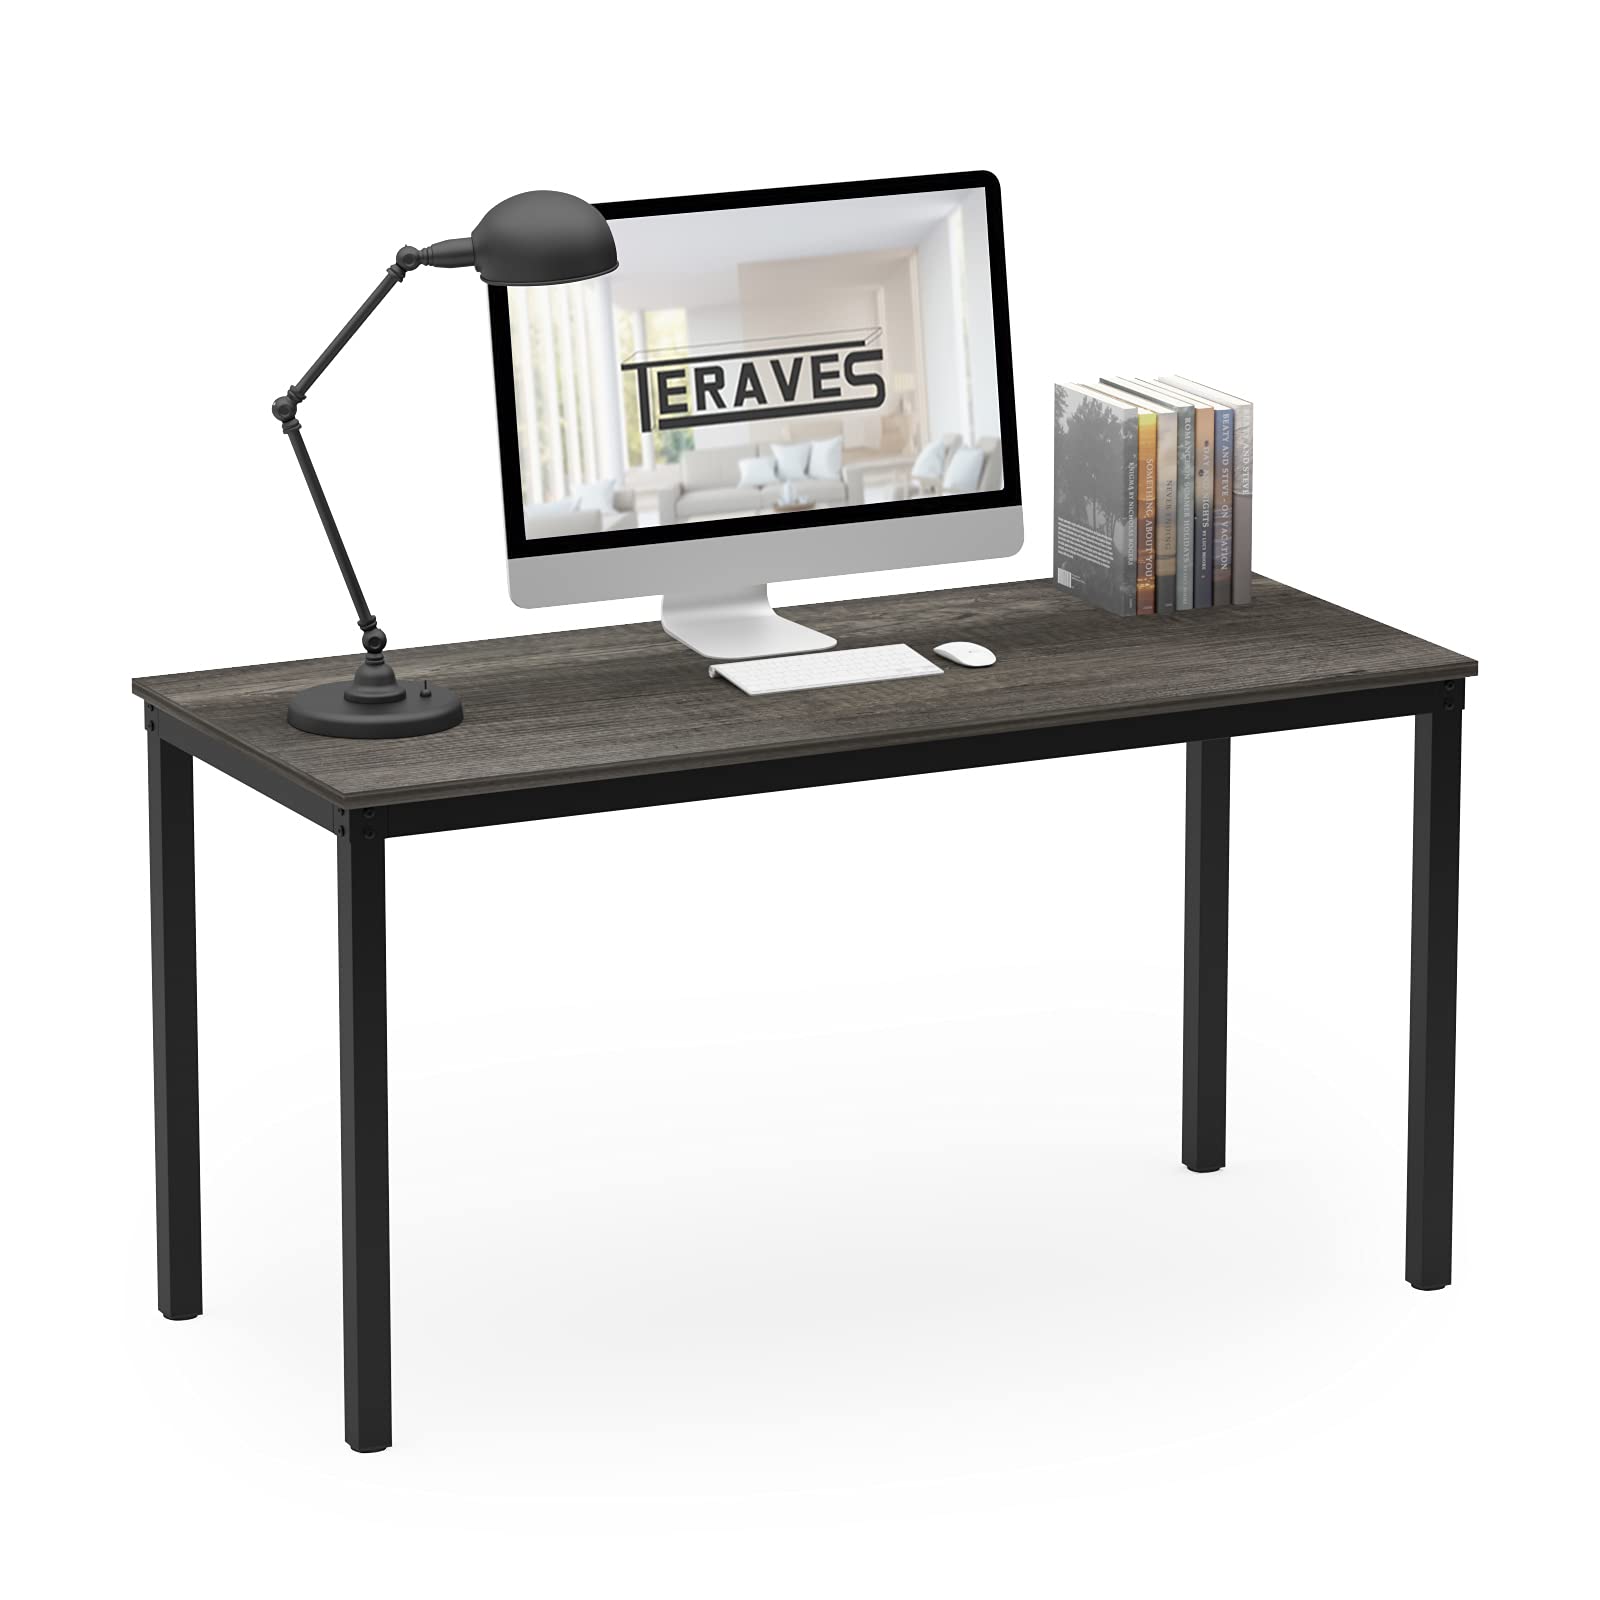 Teraves Computer Desk/Dining Table Office Desk Sturdy Writing Workstation for Home Office (55.11“, Black Oak)